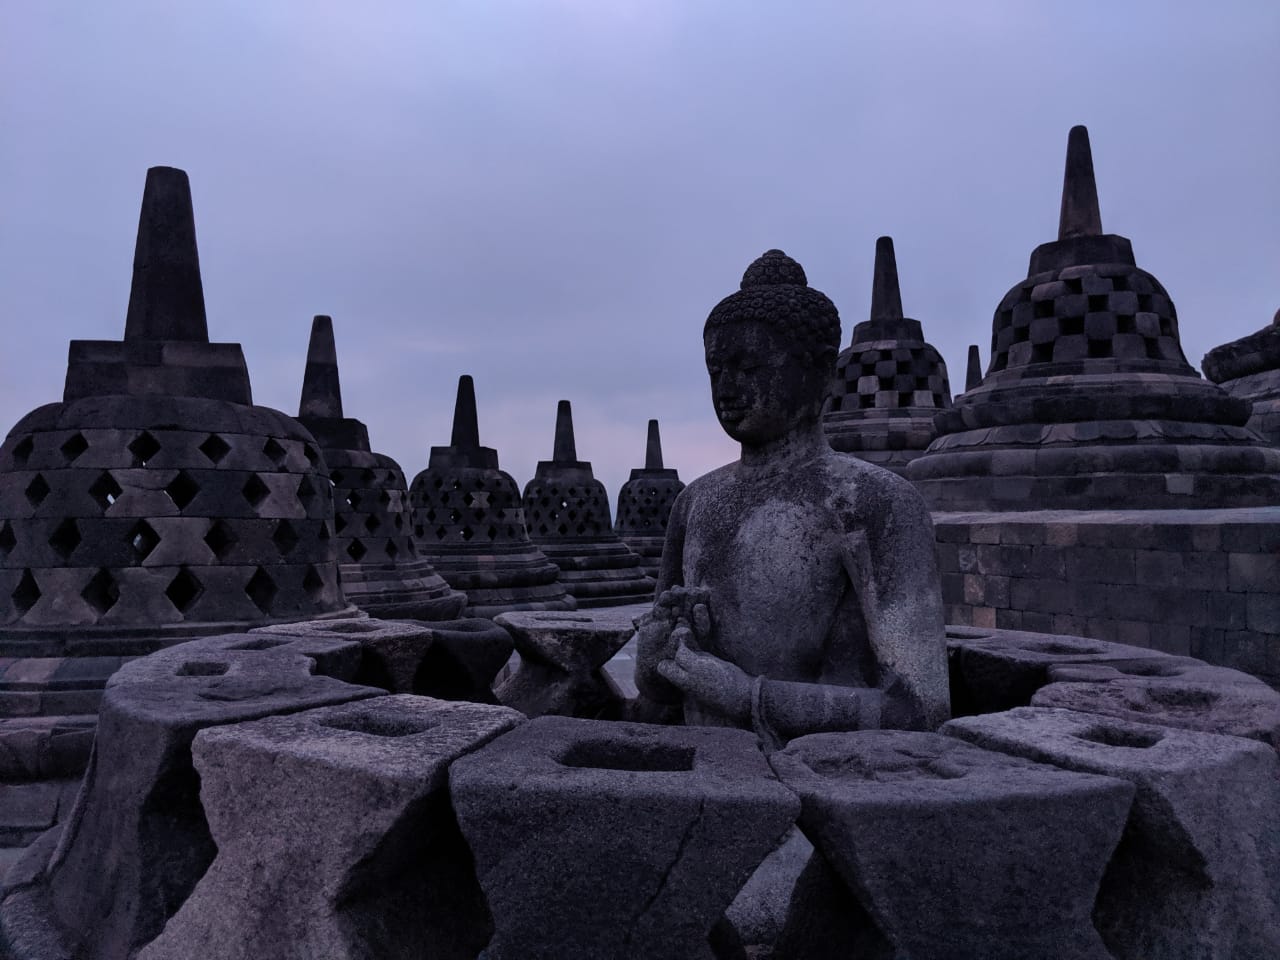 At sunrise the Borbadur temple is a majestic sight to behold as the meditative Buddhas and stupas in and around the temple complex slowly take shape with the breaking dawn